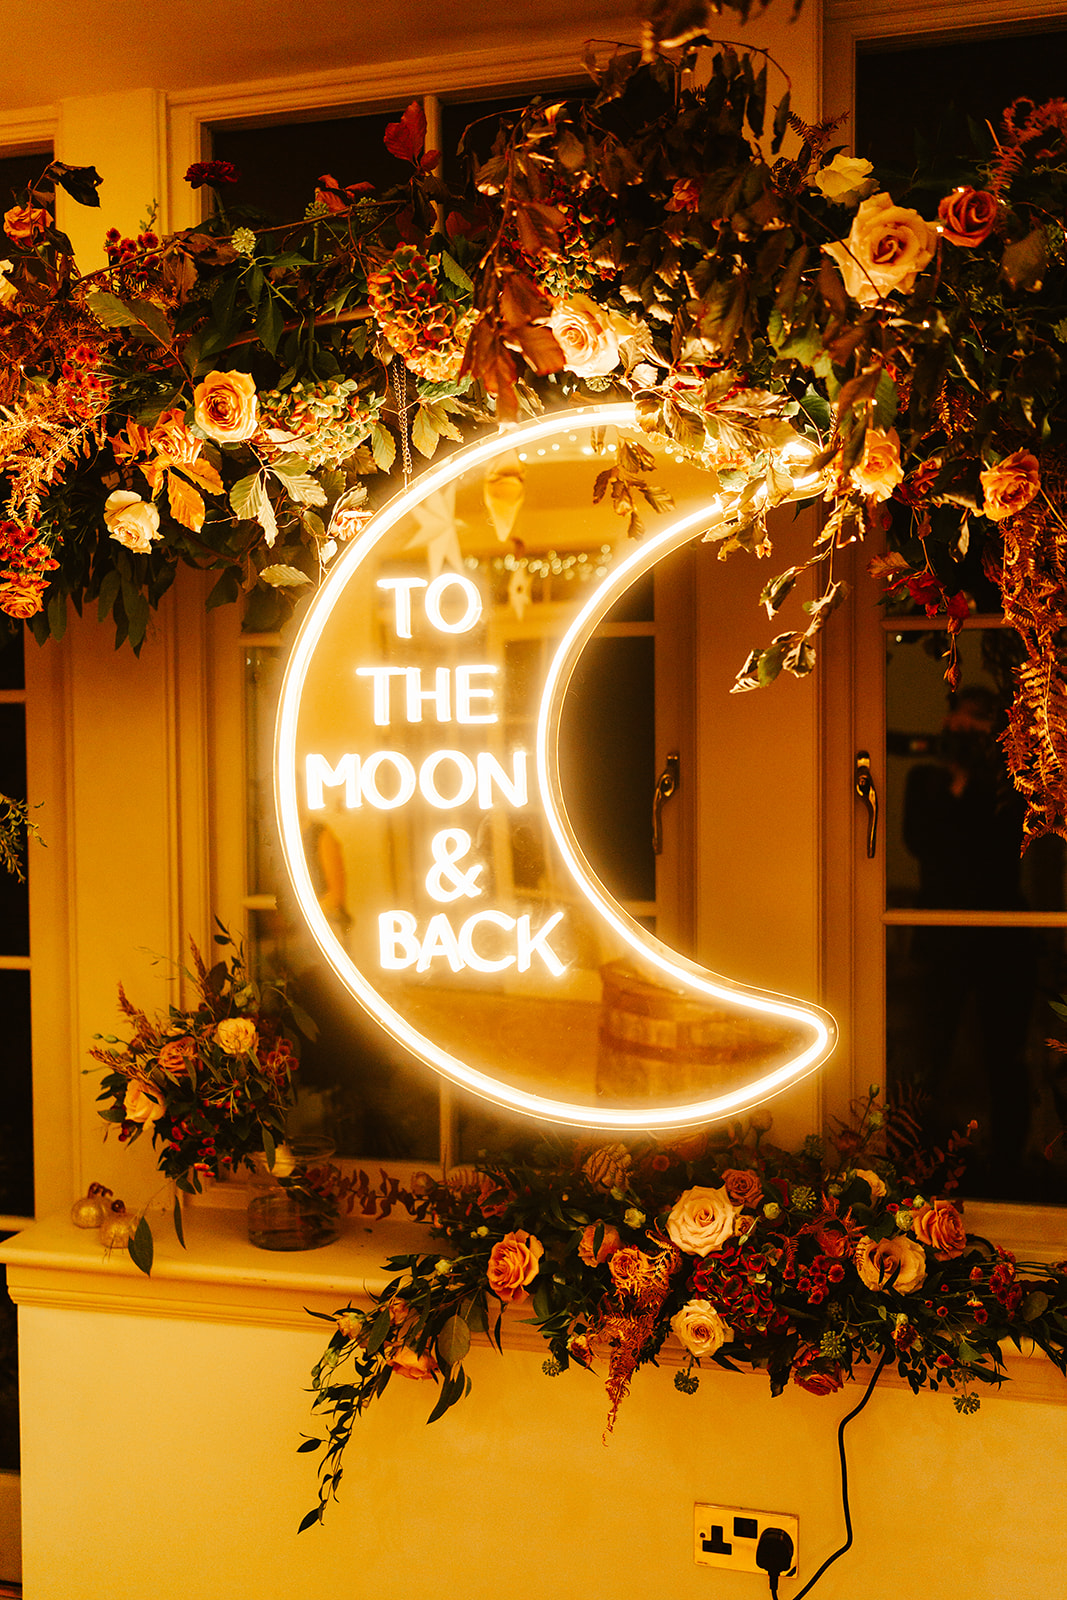 bespoke neon sign of a monn it says to the moon and back